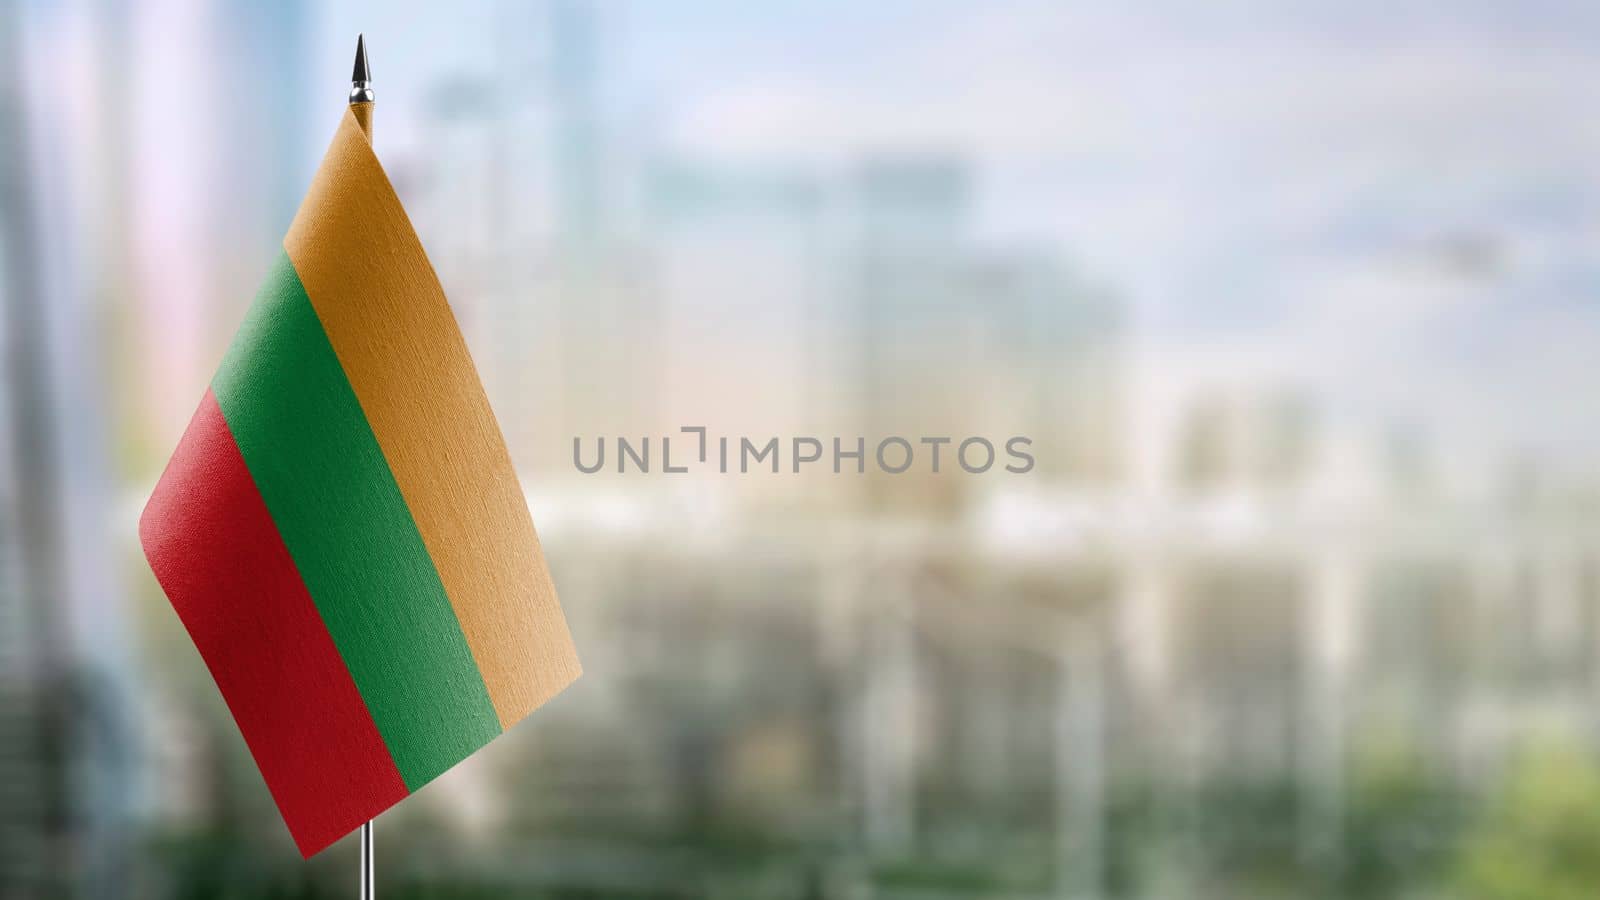 A small Lithuania flag on an abstract blurry background.